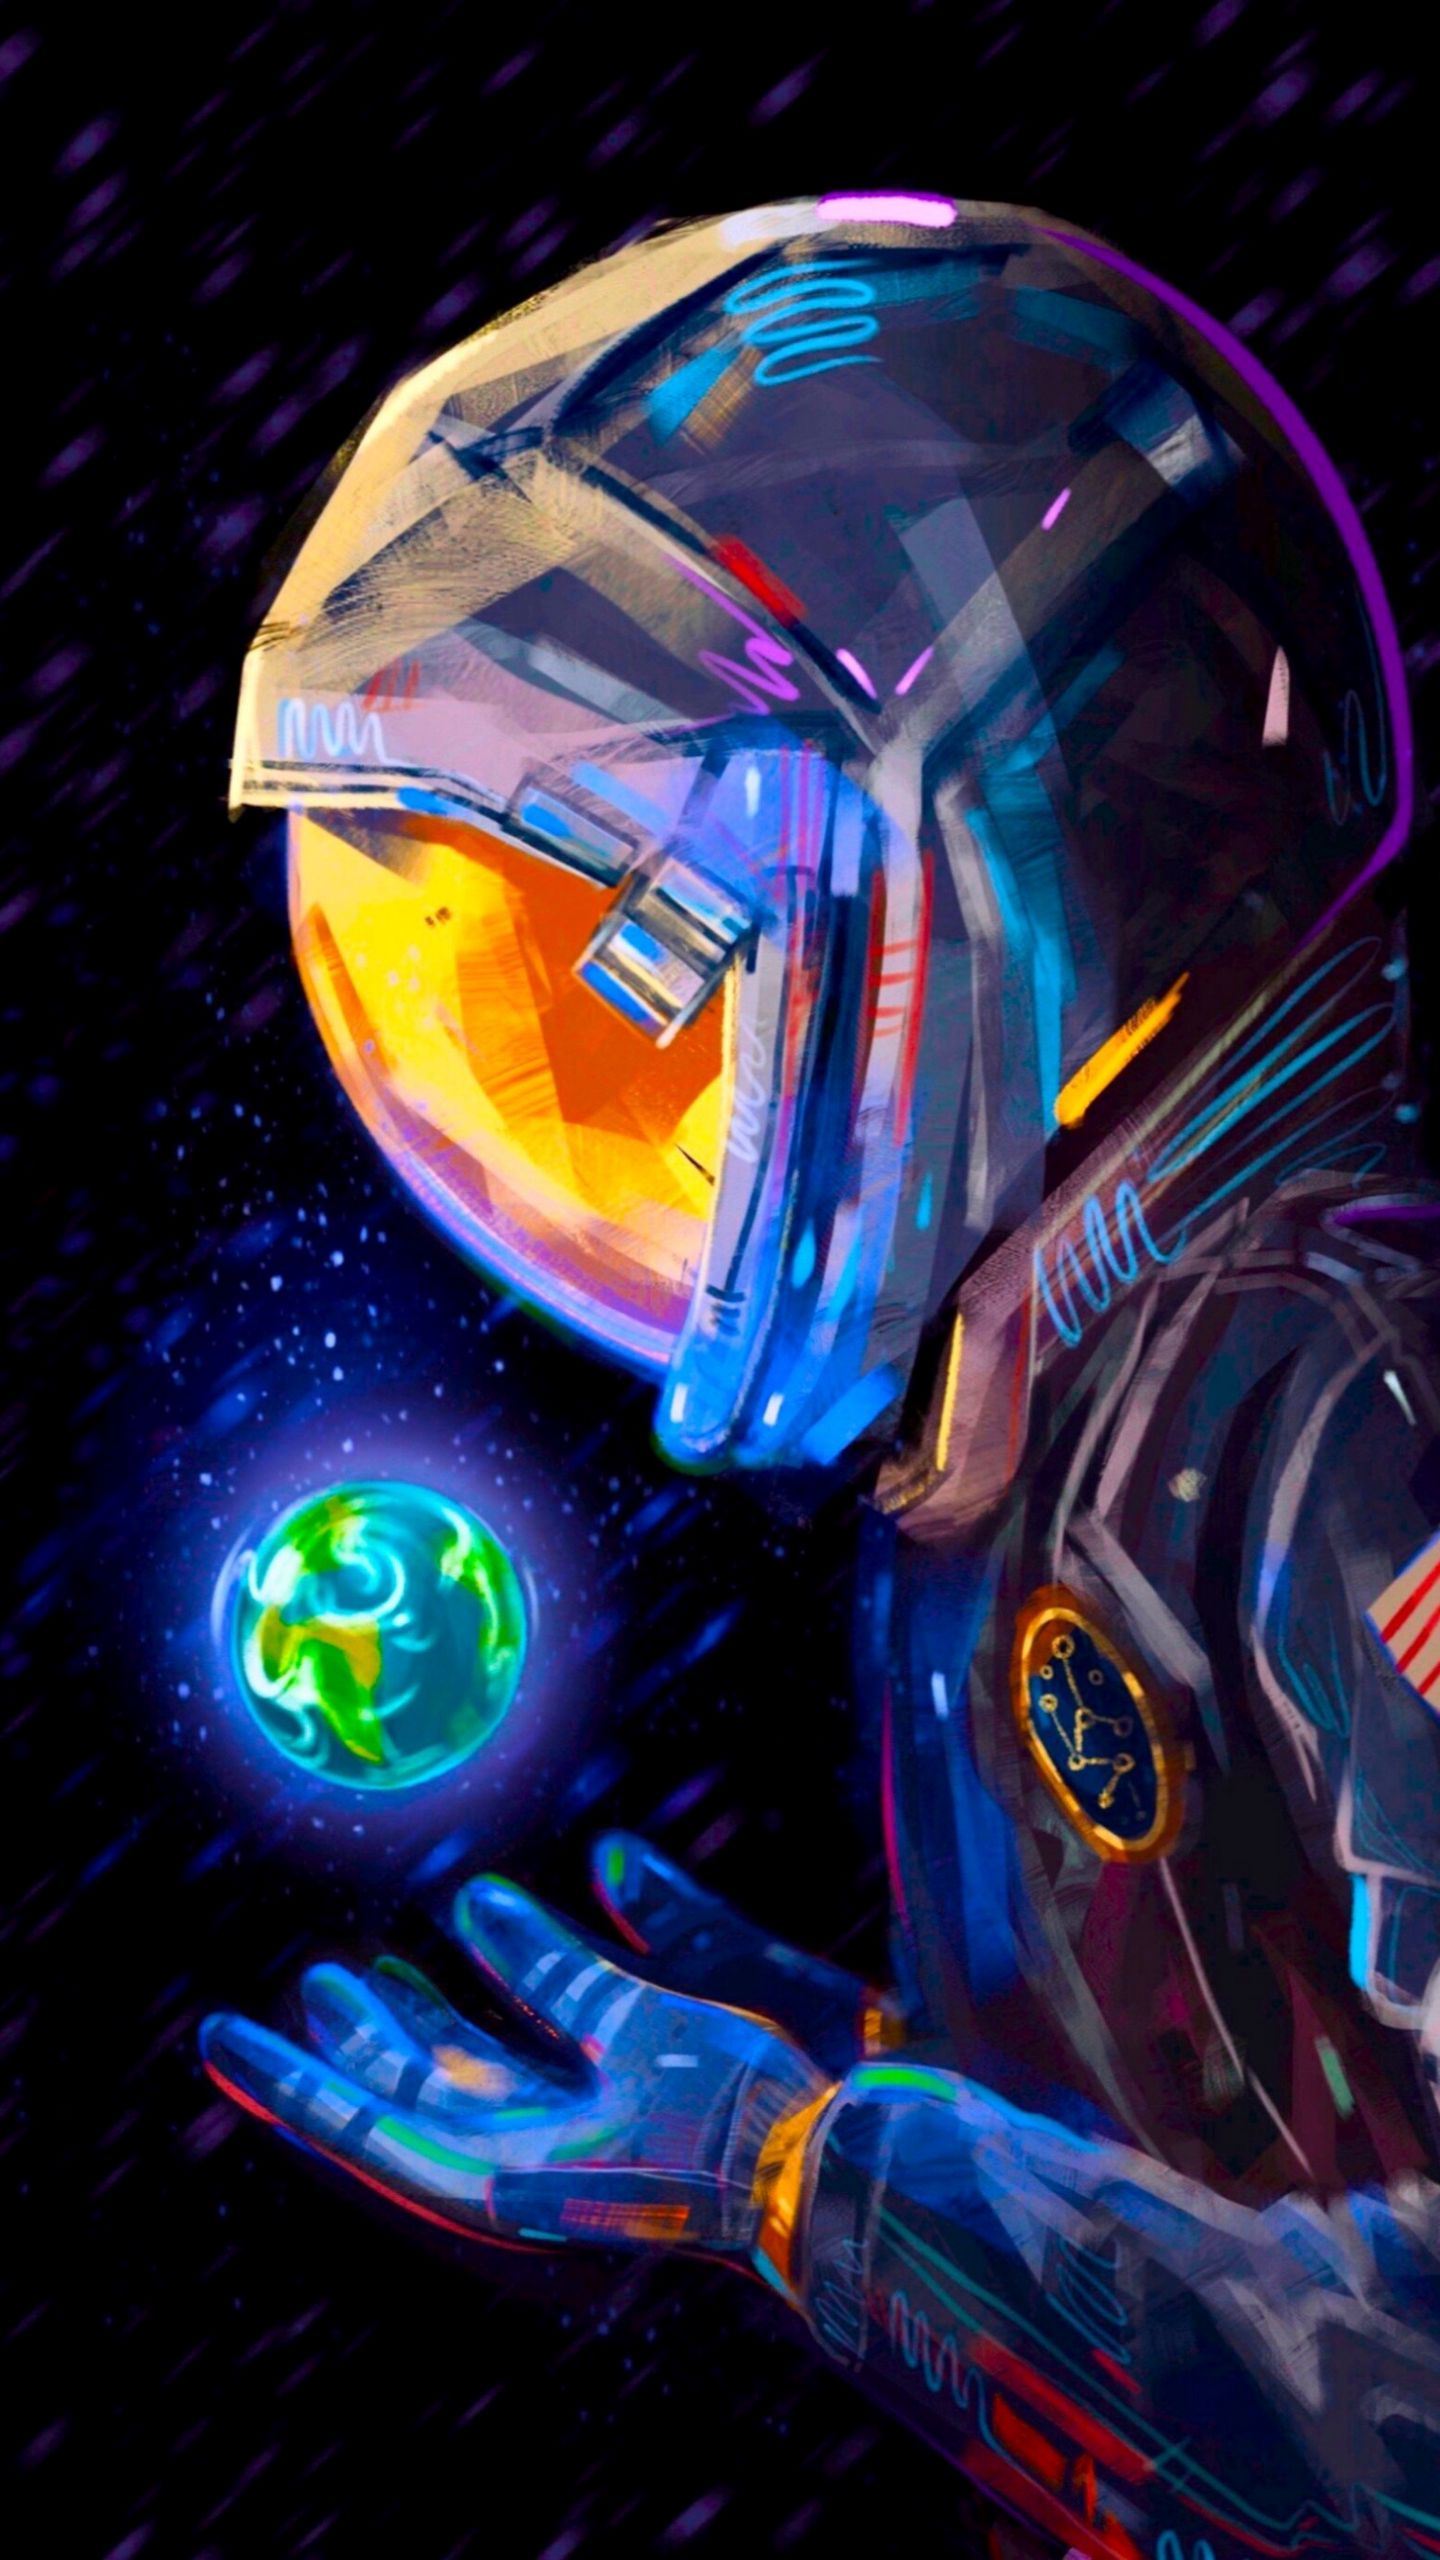 Download wallpaper 1440x2560 astronaut, spacesuit, earth, planet, art qhd samsung galaxy s s edge, note, lg g4 HD background